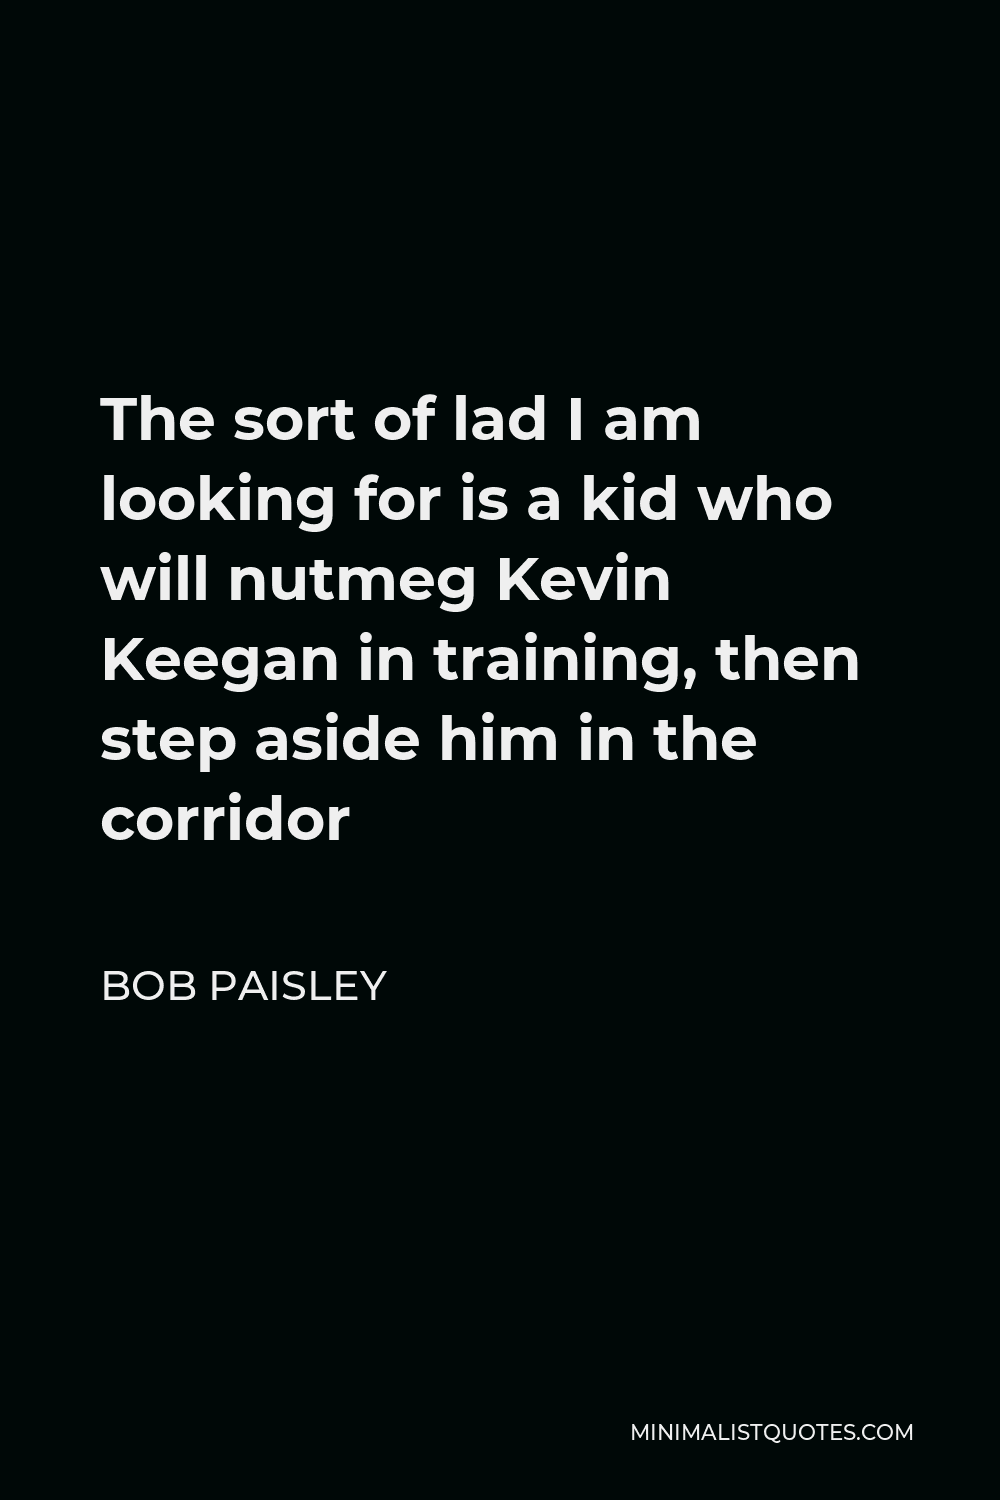 Bob Paisley Quote - The sort of lad I am looking for is a kid who will nutmeg Kevin Keegan in training, then step aside him in the corridor